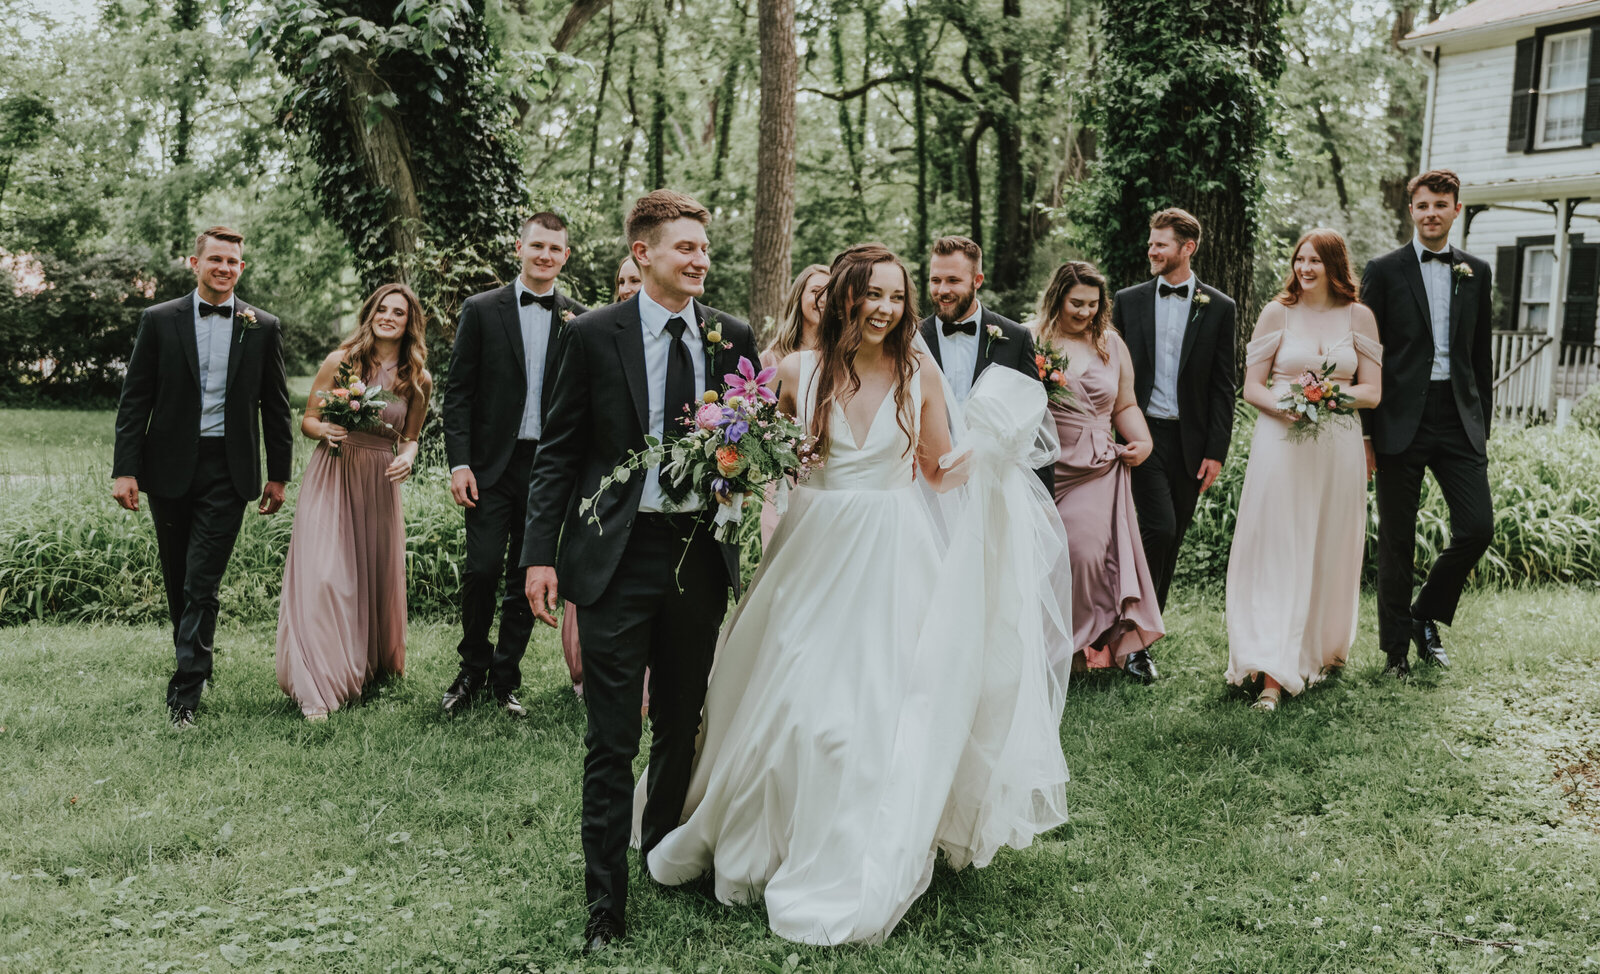 A bride and groom walk with their wedding party through the woods